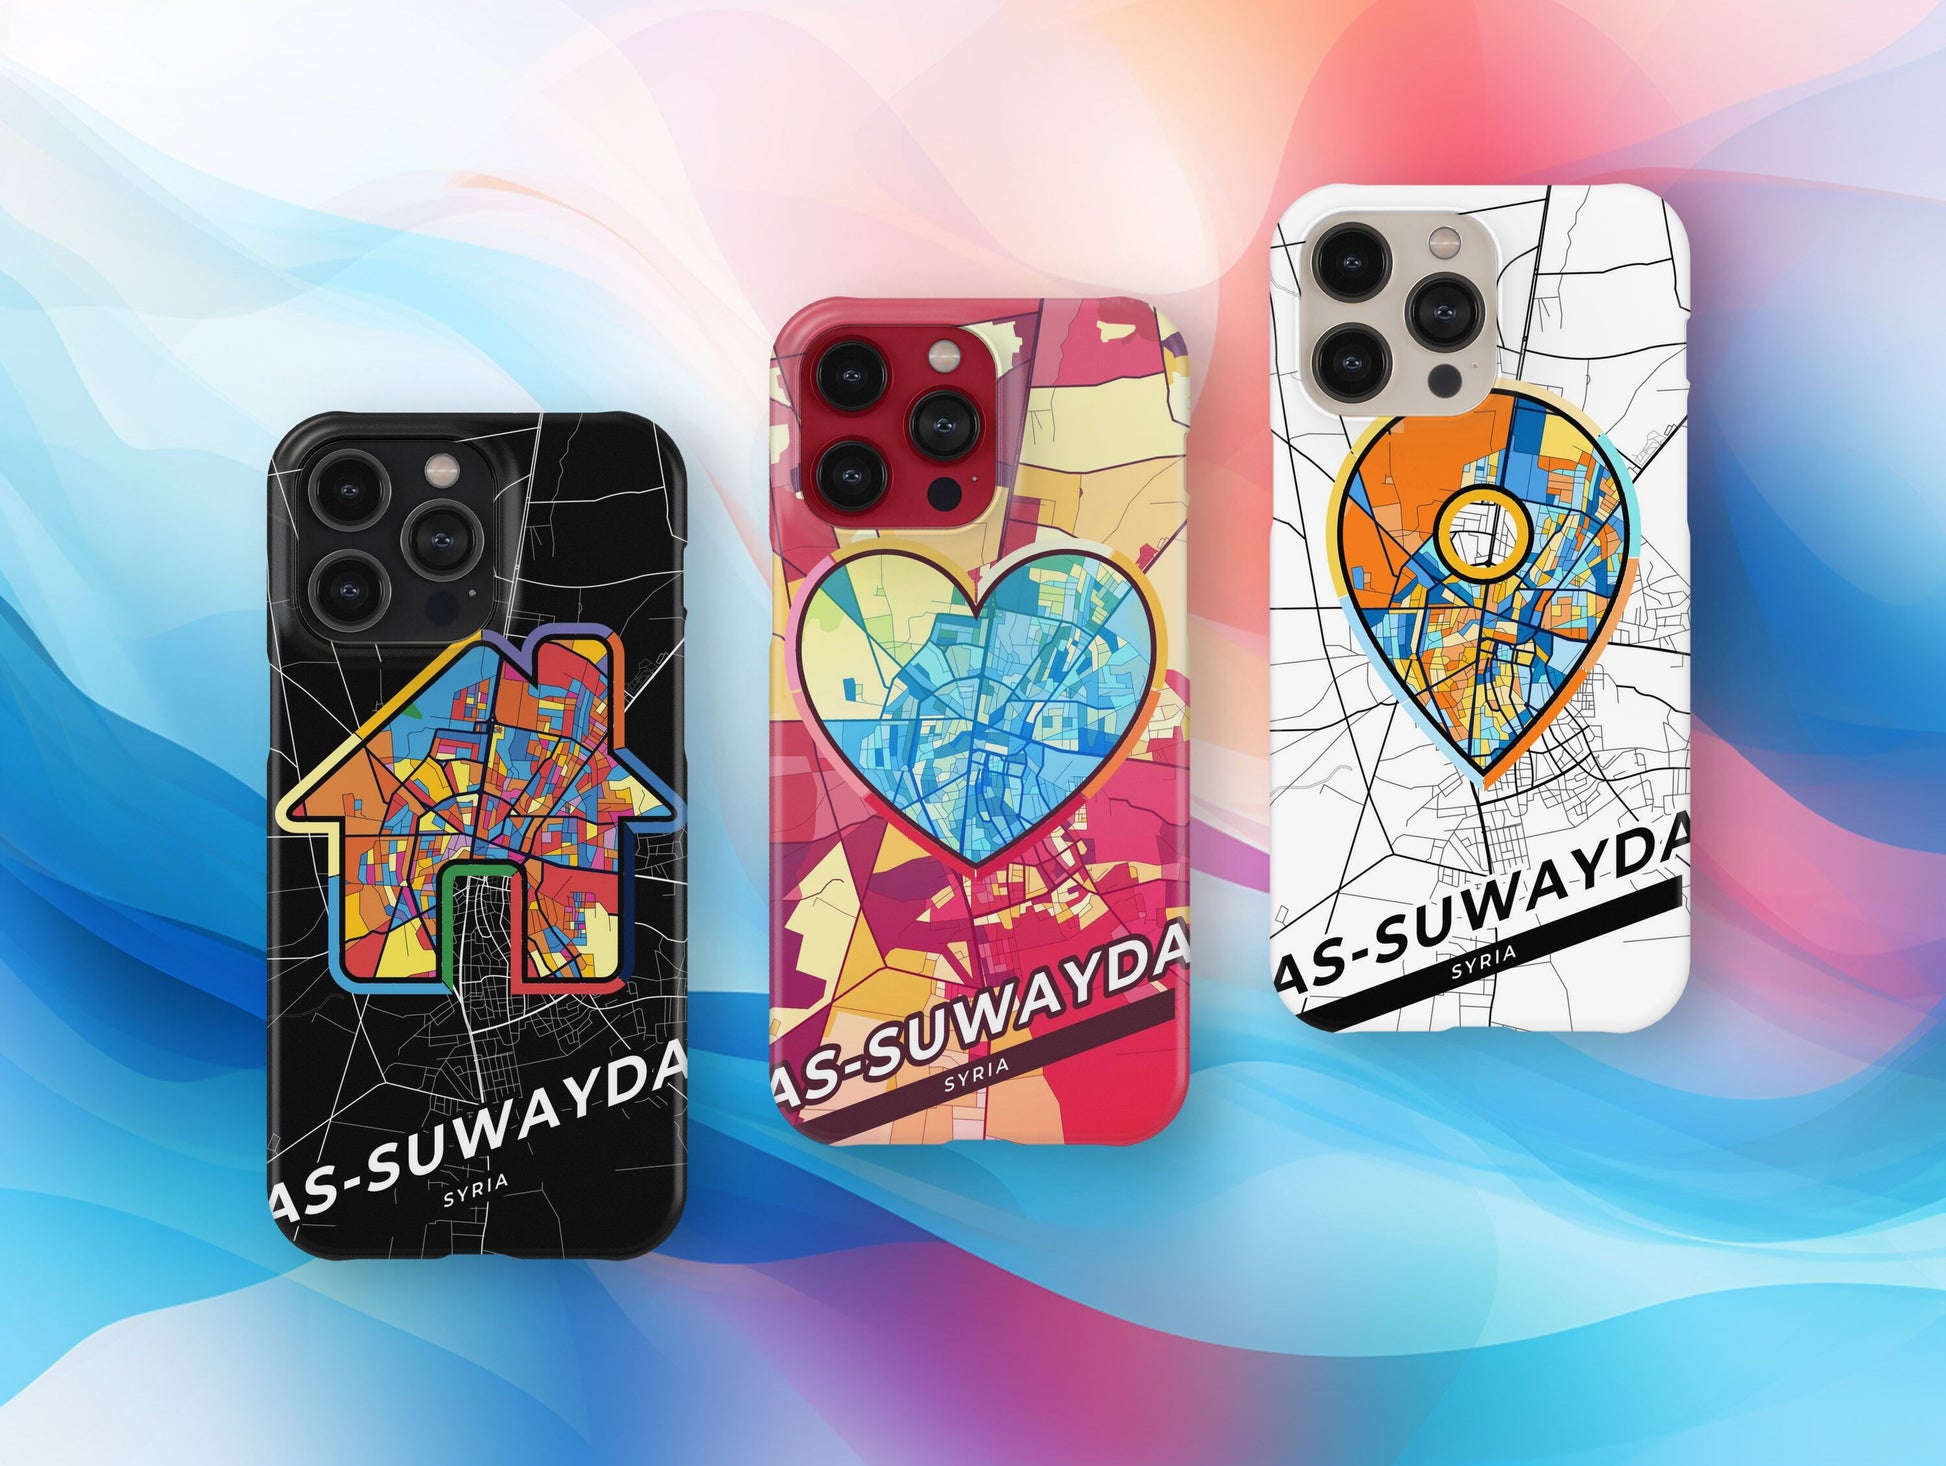 As-Suwayda Syria slim phone case with colorful icon. Birthday, wedding or housewarming gift. Couple match cases.